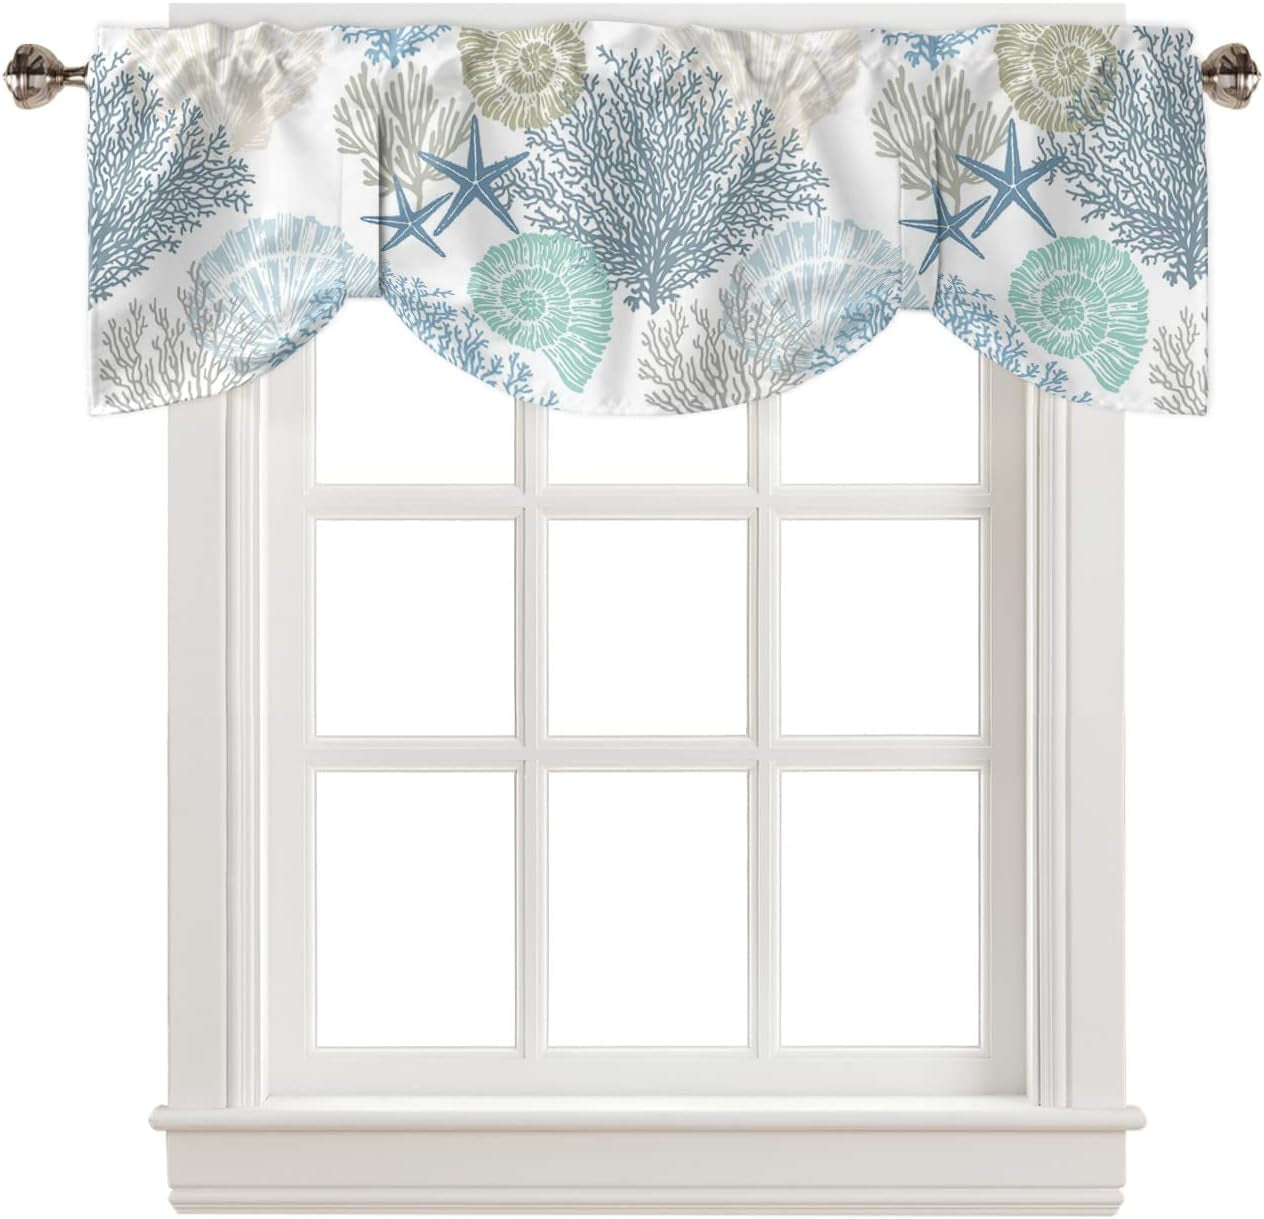 Marine Life Curtains for Bedroom Living Room Aqua Ocean Coral Shell Starfish Roman Shades for Windows Curtains & Drapes Rod Pocket Valances for Kitchen Window Curtains over Sink 54X18In,1 Panel